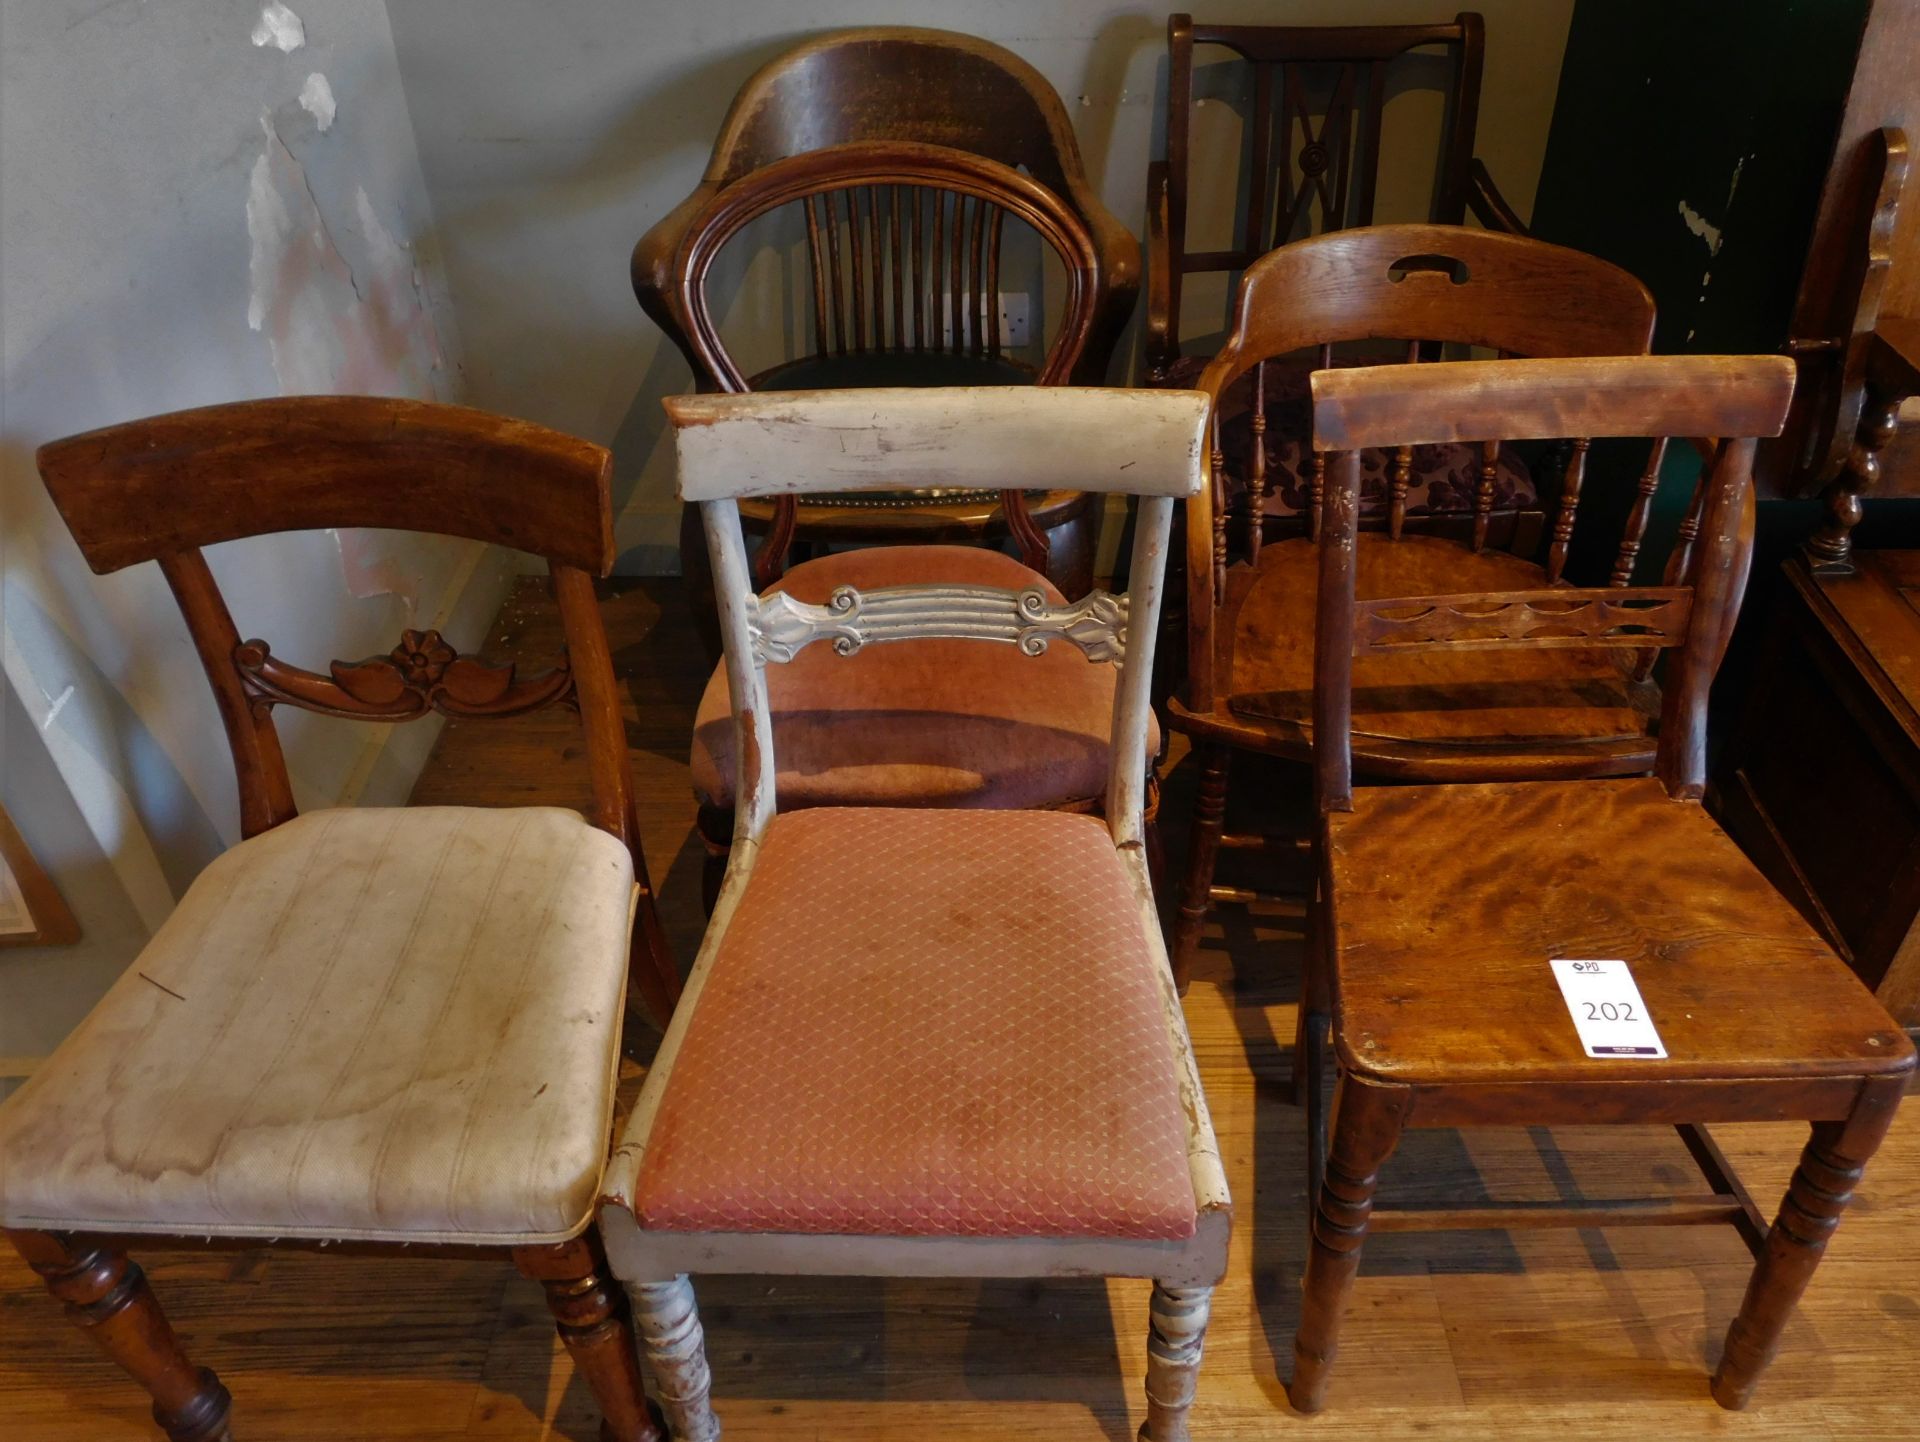 4 Regency Style Dining Chairs, Spindle Back Oak Armchair, Early 20th Century Office Chair on